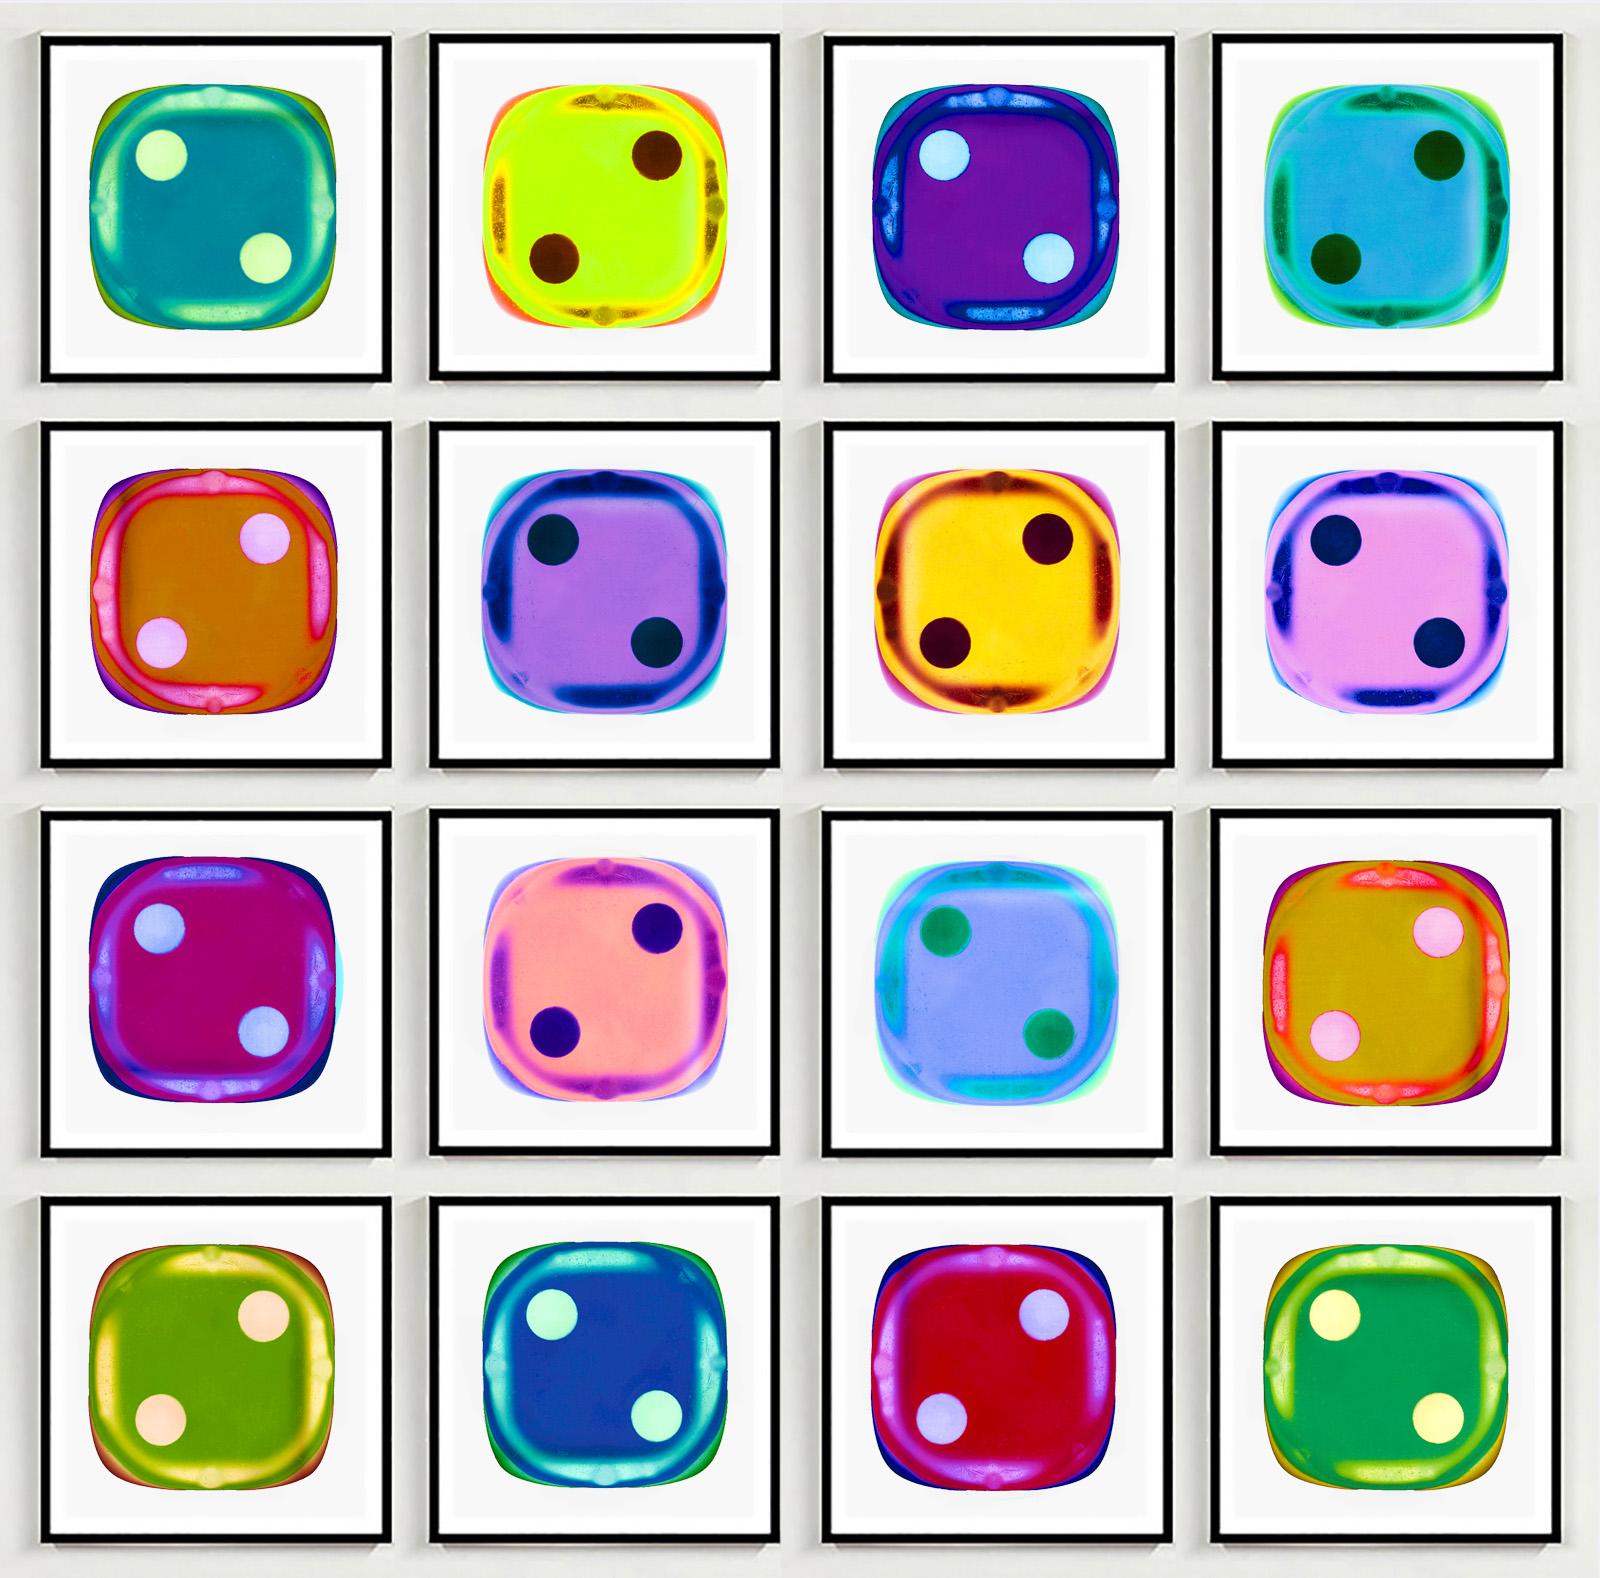 Heidler & Heeps Dice Series Sixteen Piece Multicolor 'Twos' Square Installation.
The number Two Dice, a symbol of balance and harmony, is repeated creating an infinite pattern in every direction, creating a pulsating vibrational energy.
Hypnotically